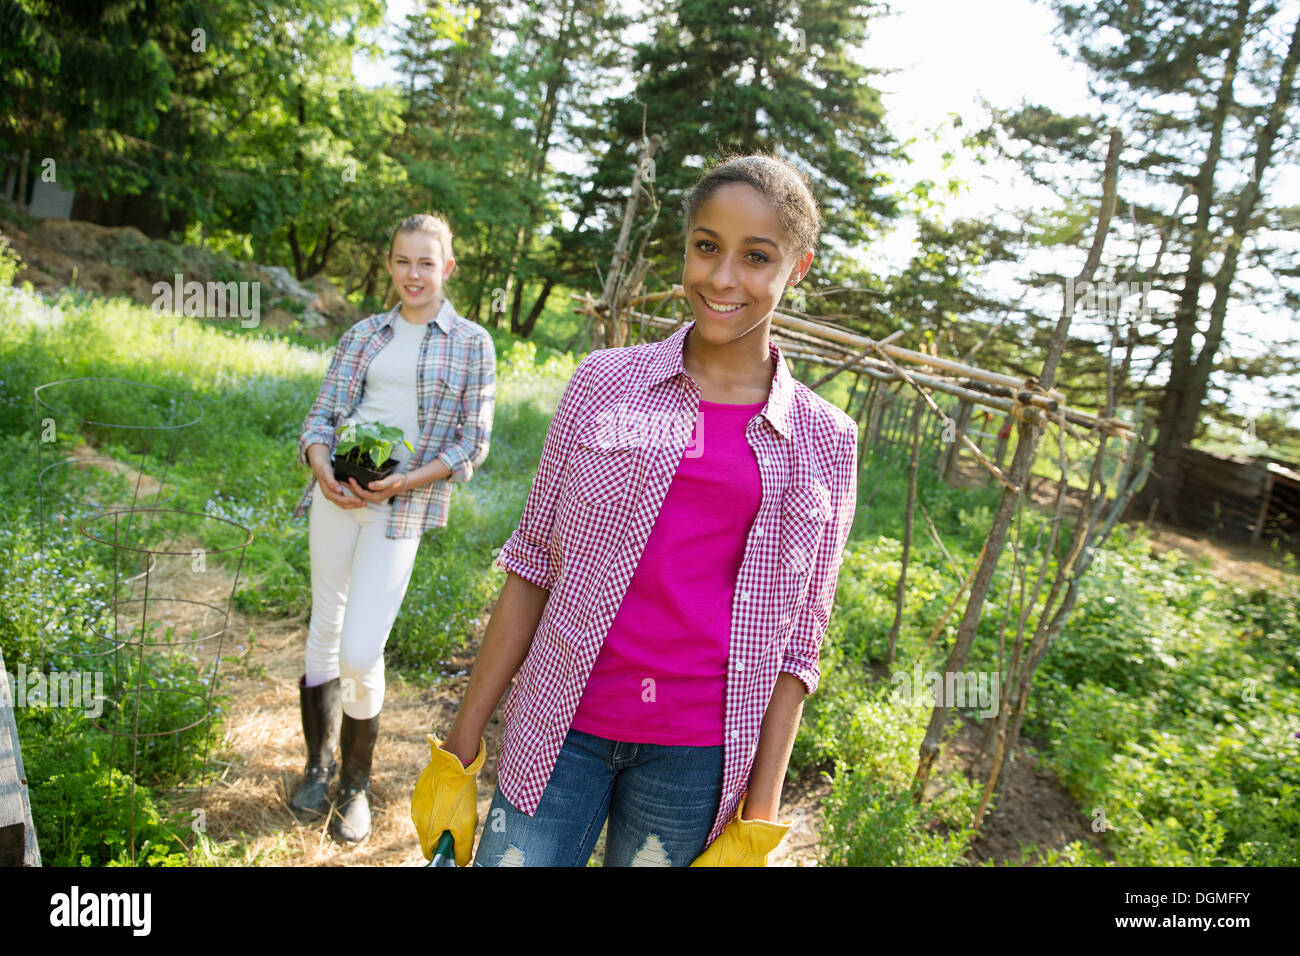 Two girls in a garden, walking up the path, one carrying a plant in a pot. Stock Photo